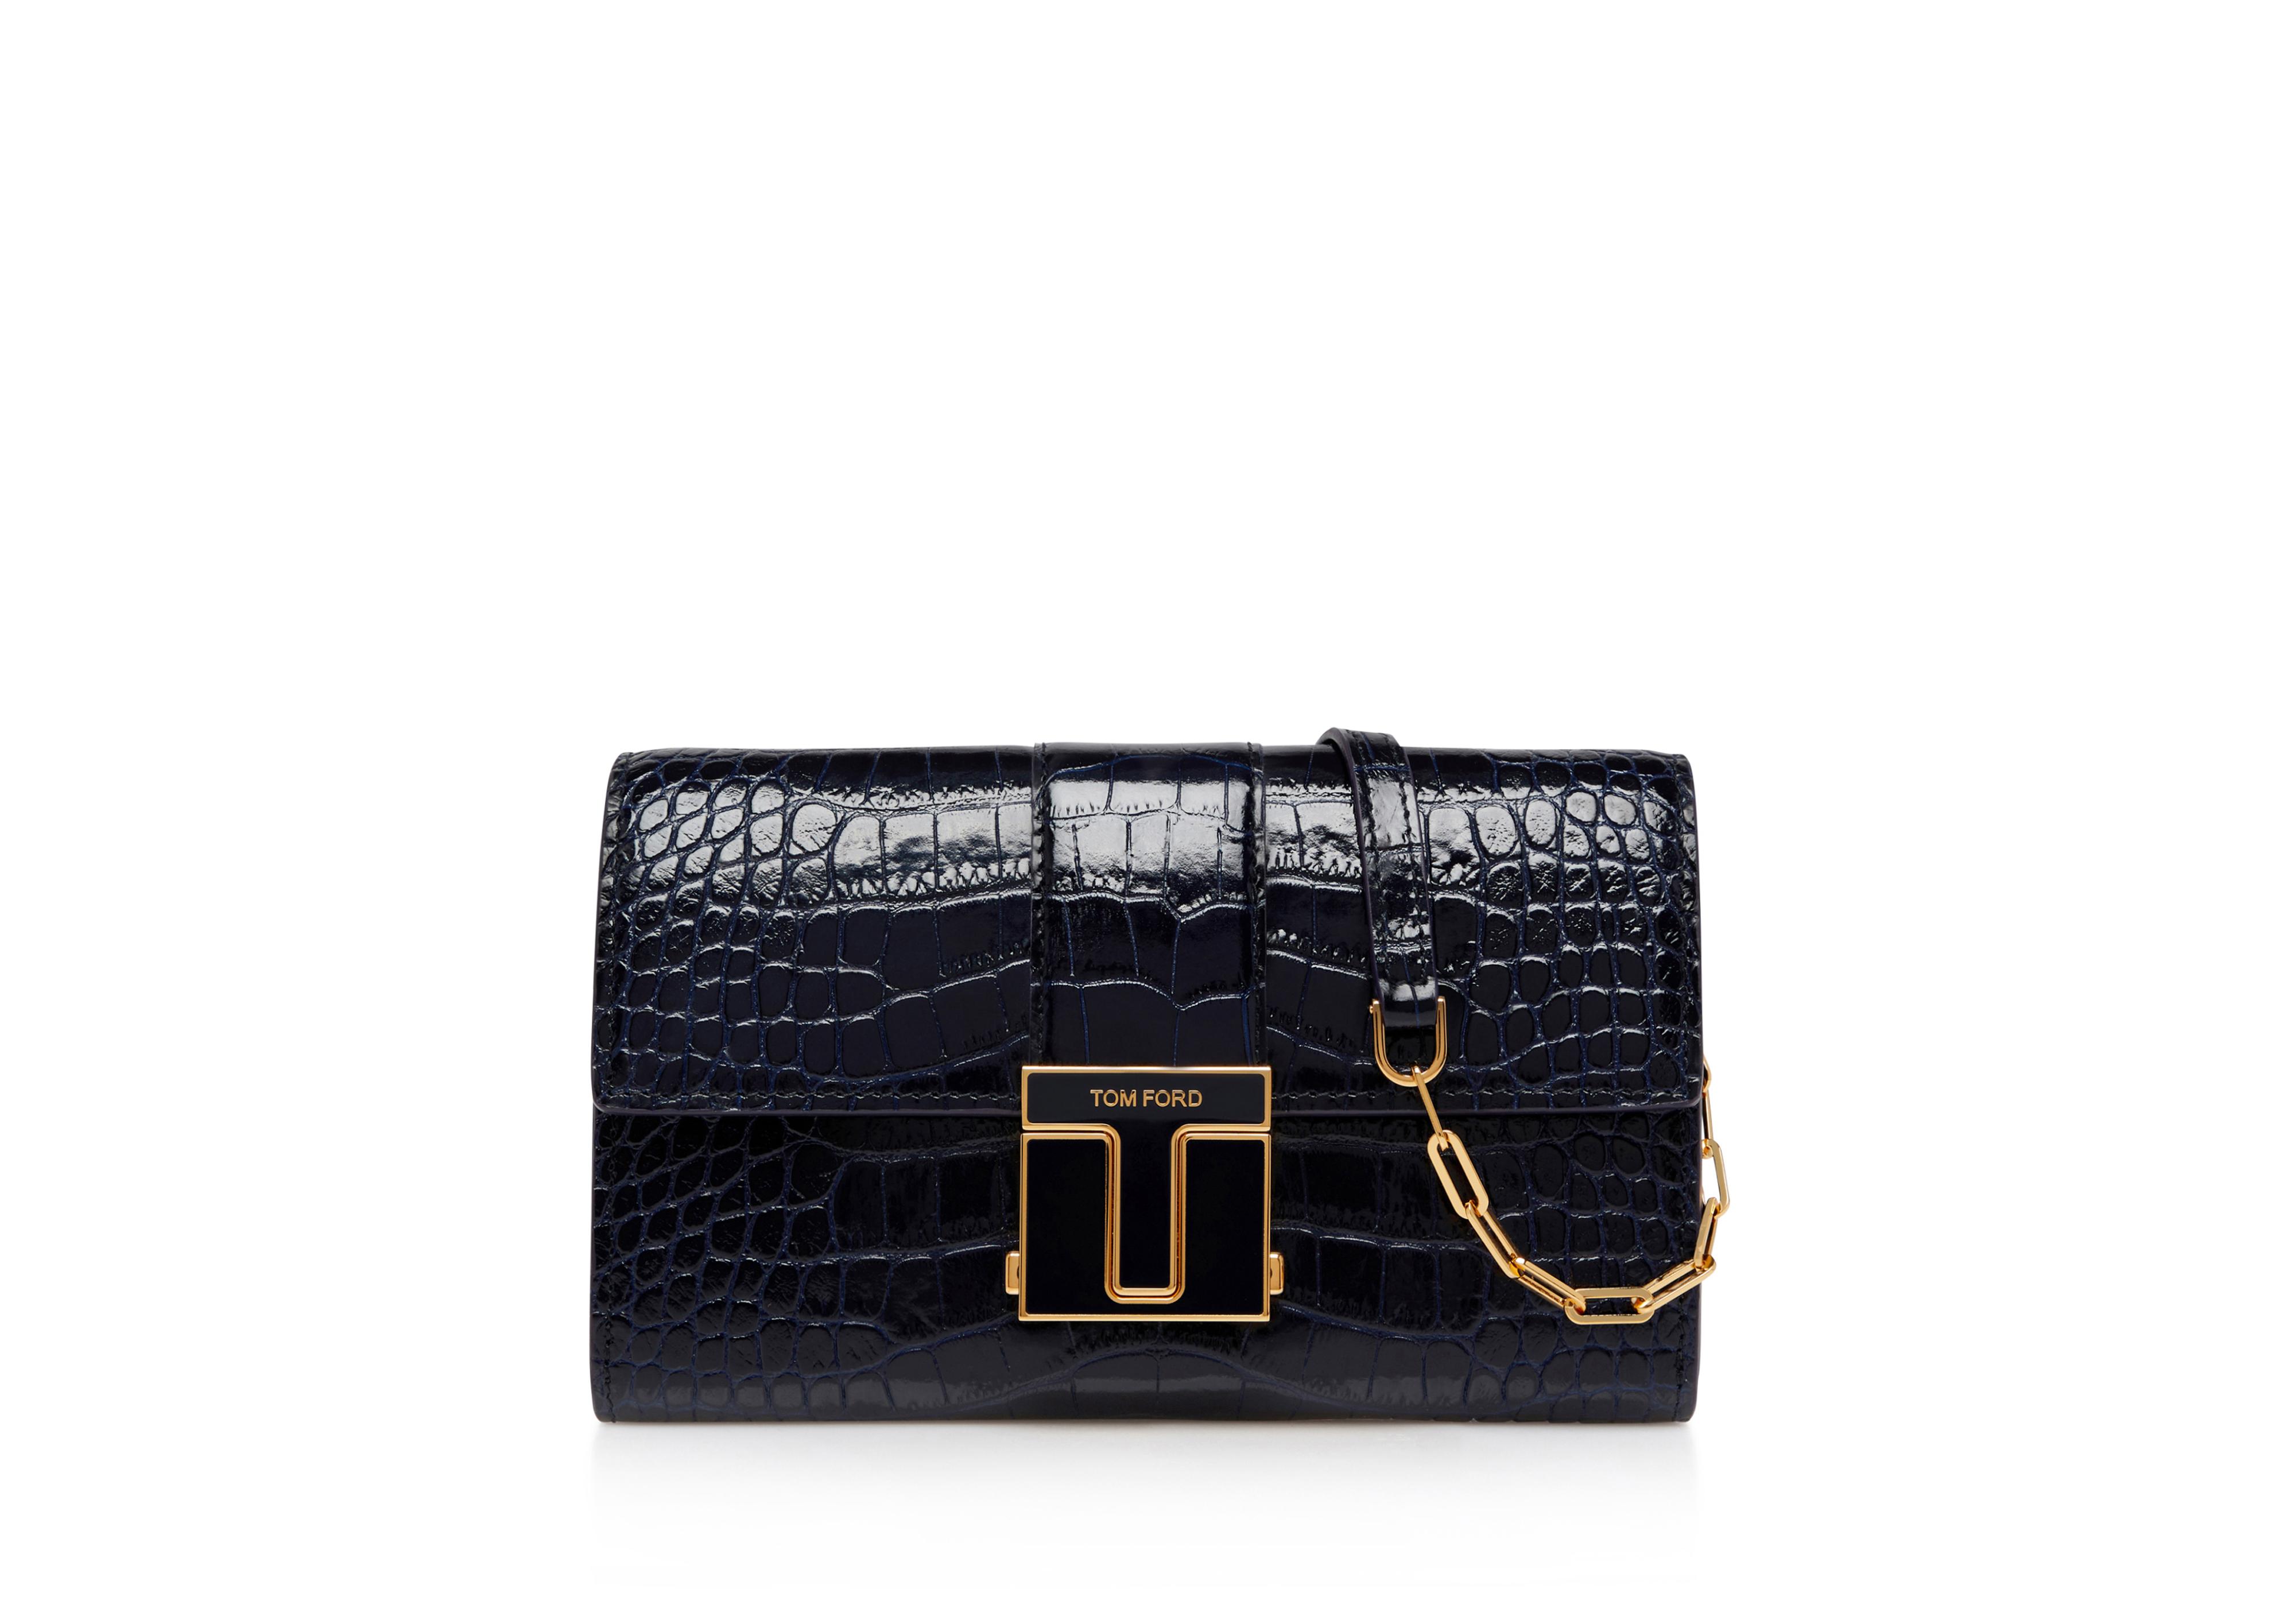 Tom Ford SHINY STAMPED CROCODILE LEATHER 001 CHAIN WALLET 